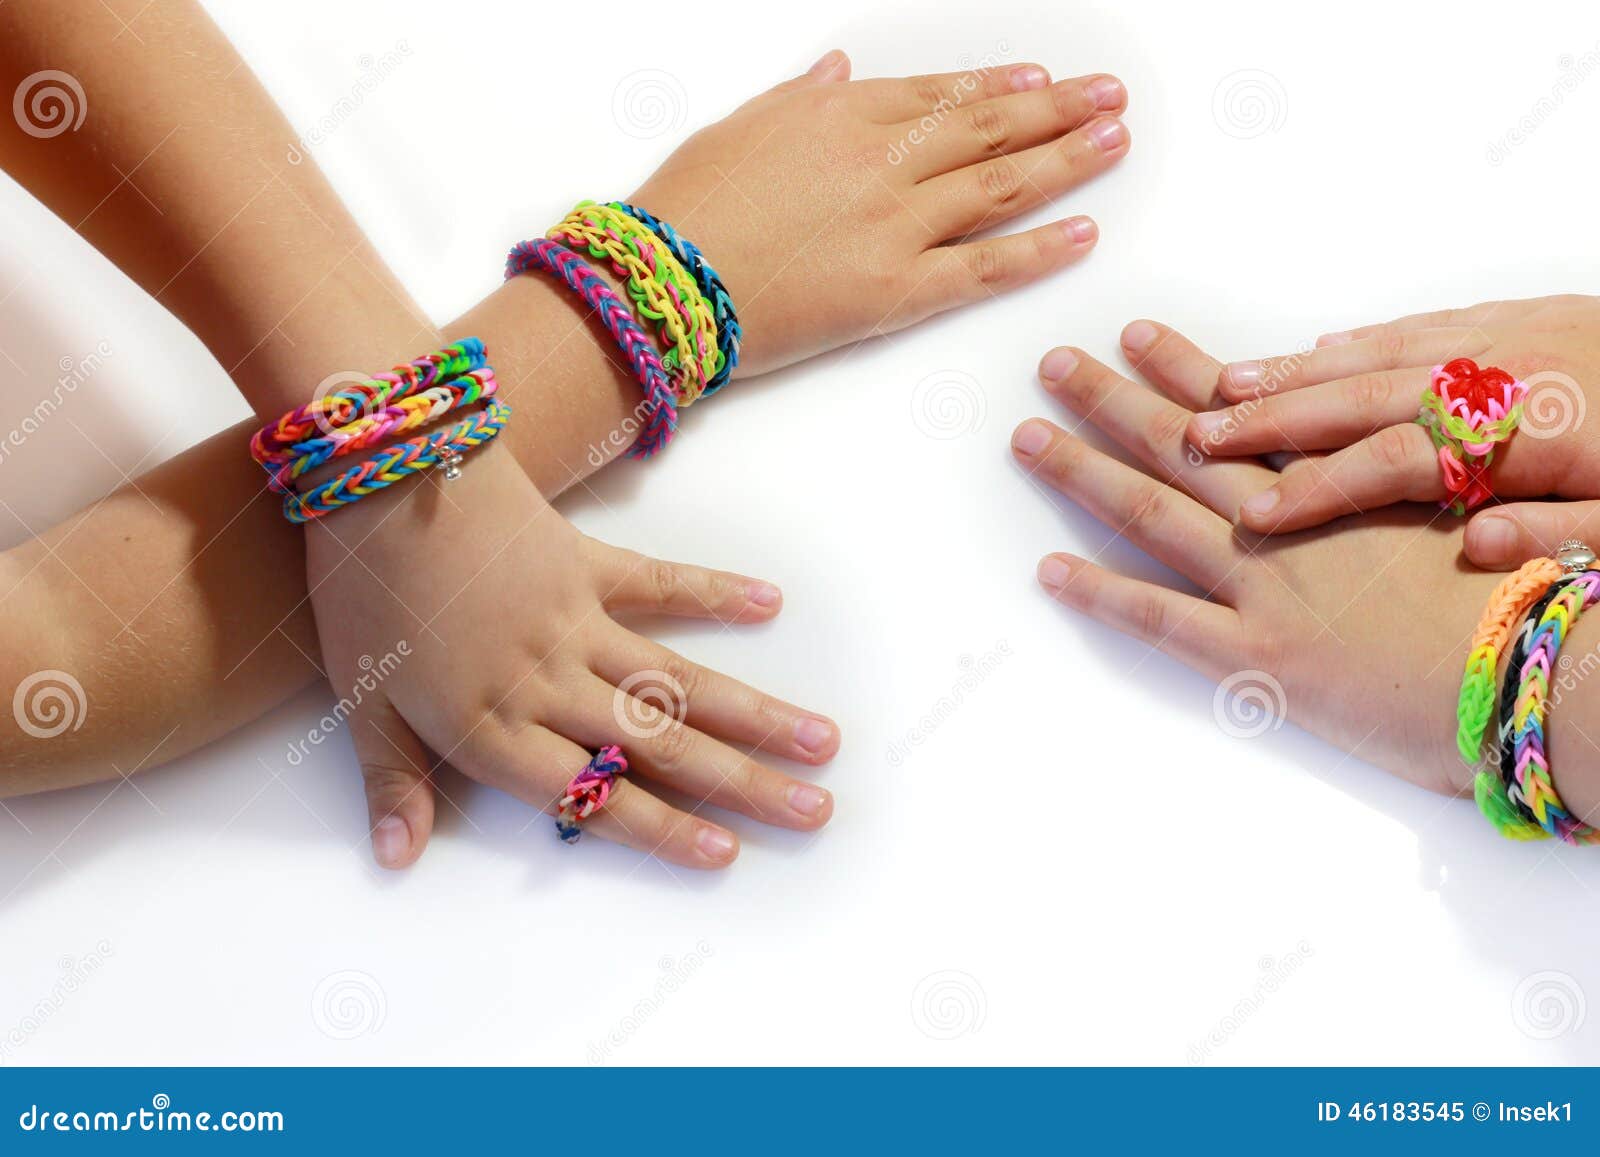 20+ Rubber Band Bracelet Stock Illustrations, Royalty-Free Vector Graphics  & Clip Art - iStock